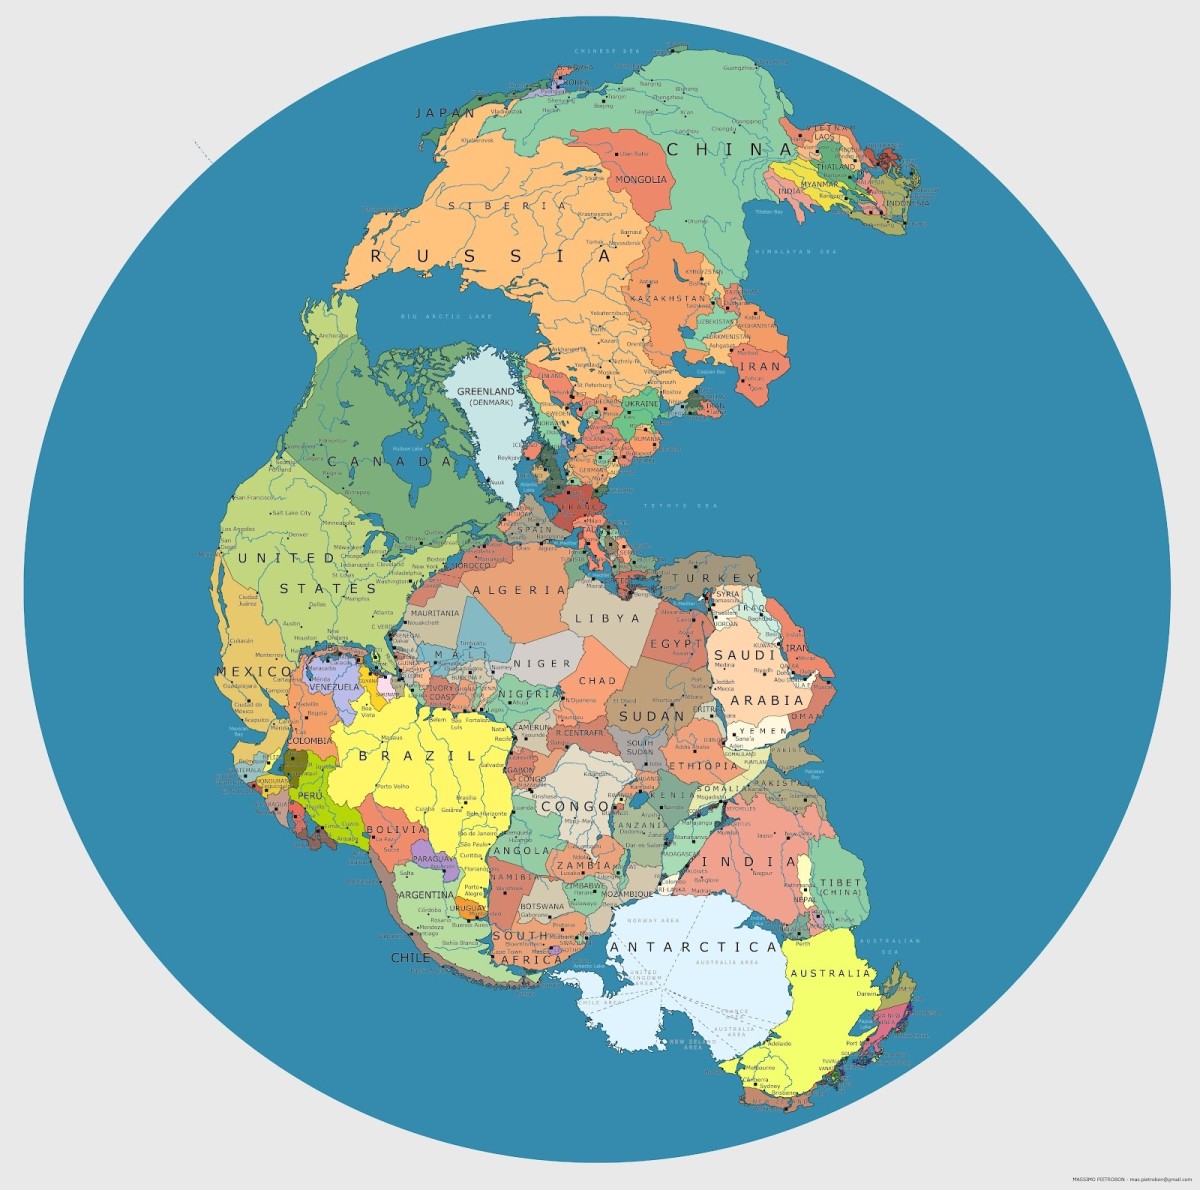 All the continents of the Earth originally formed one supercontinent: Pangea